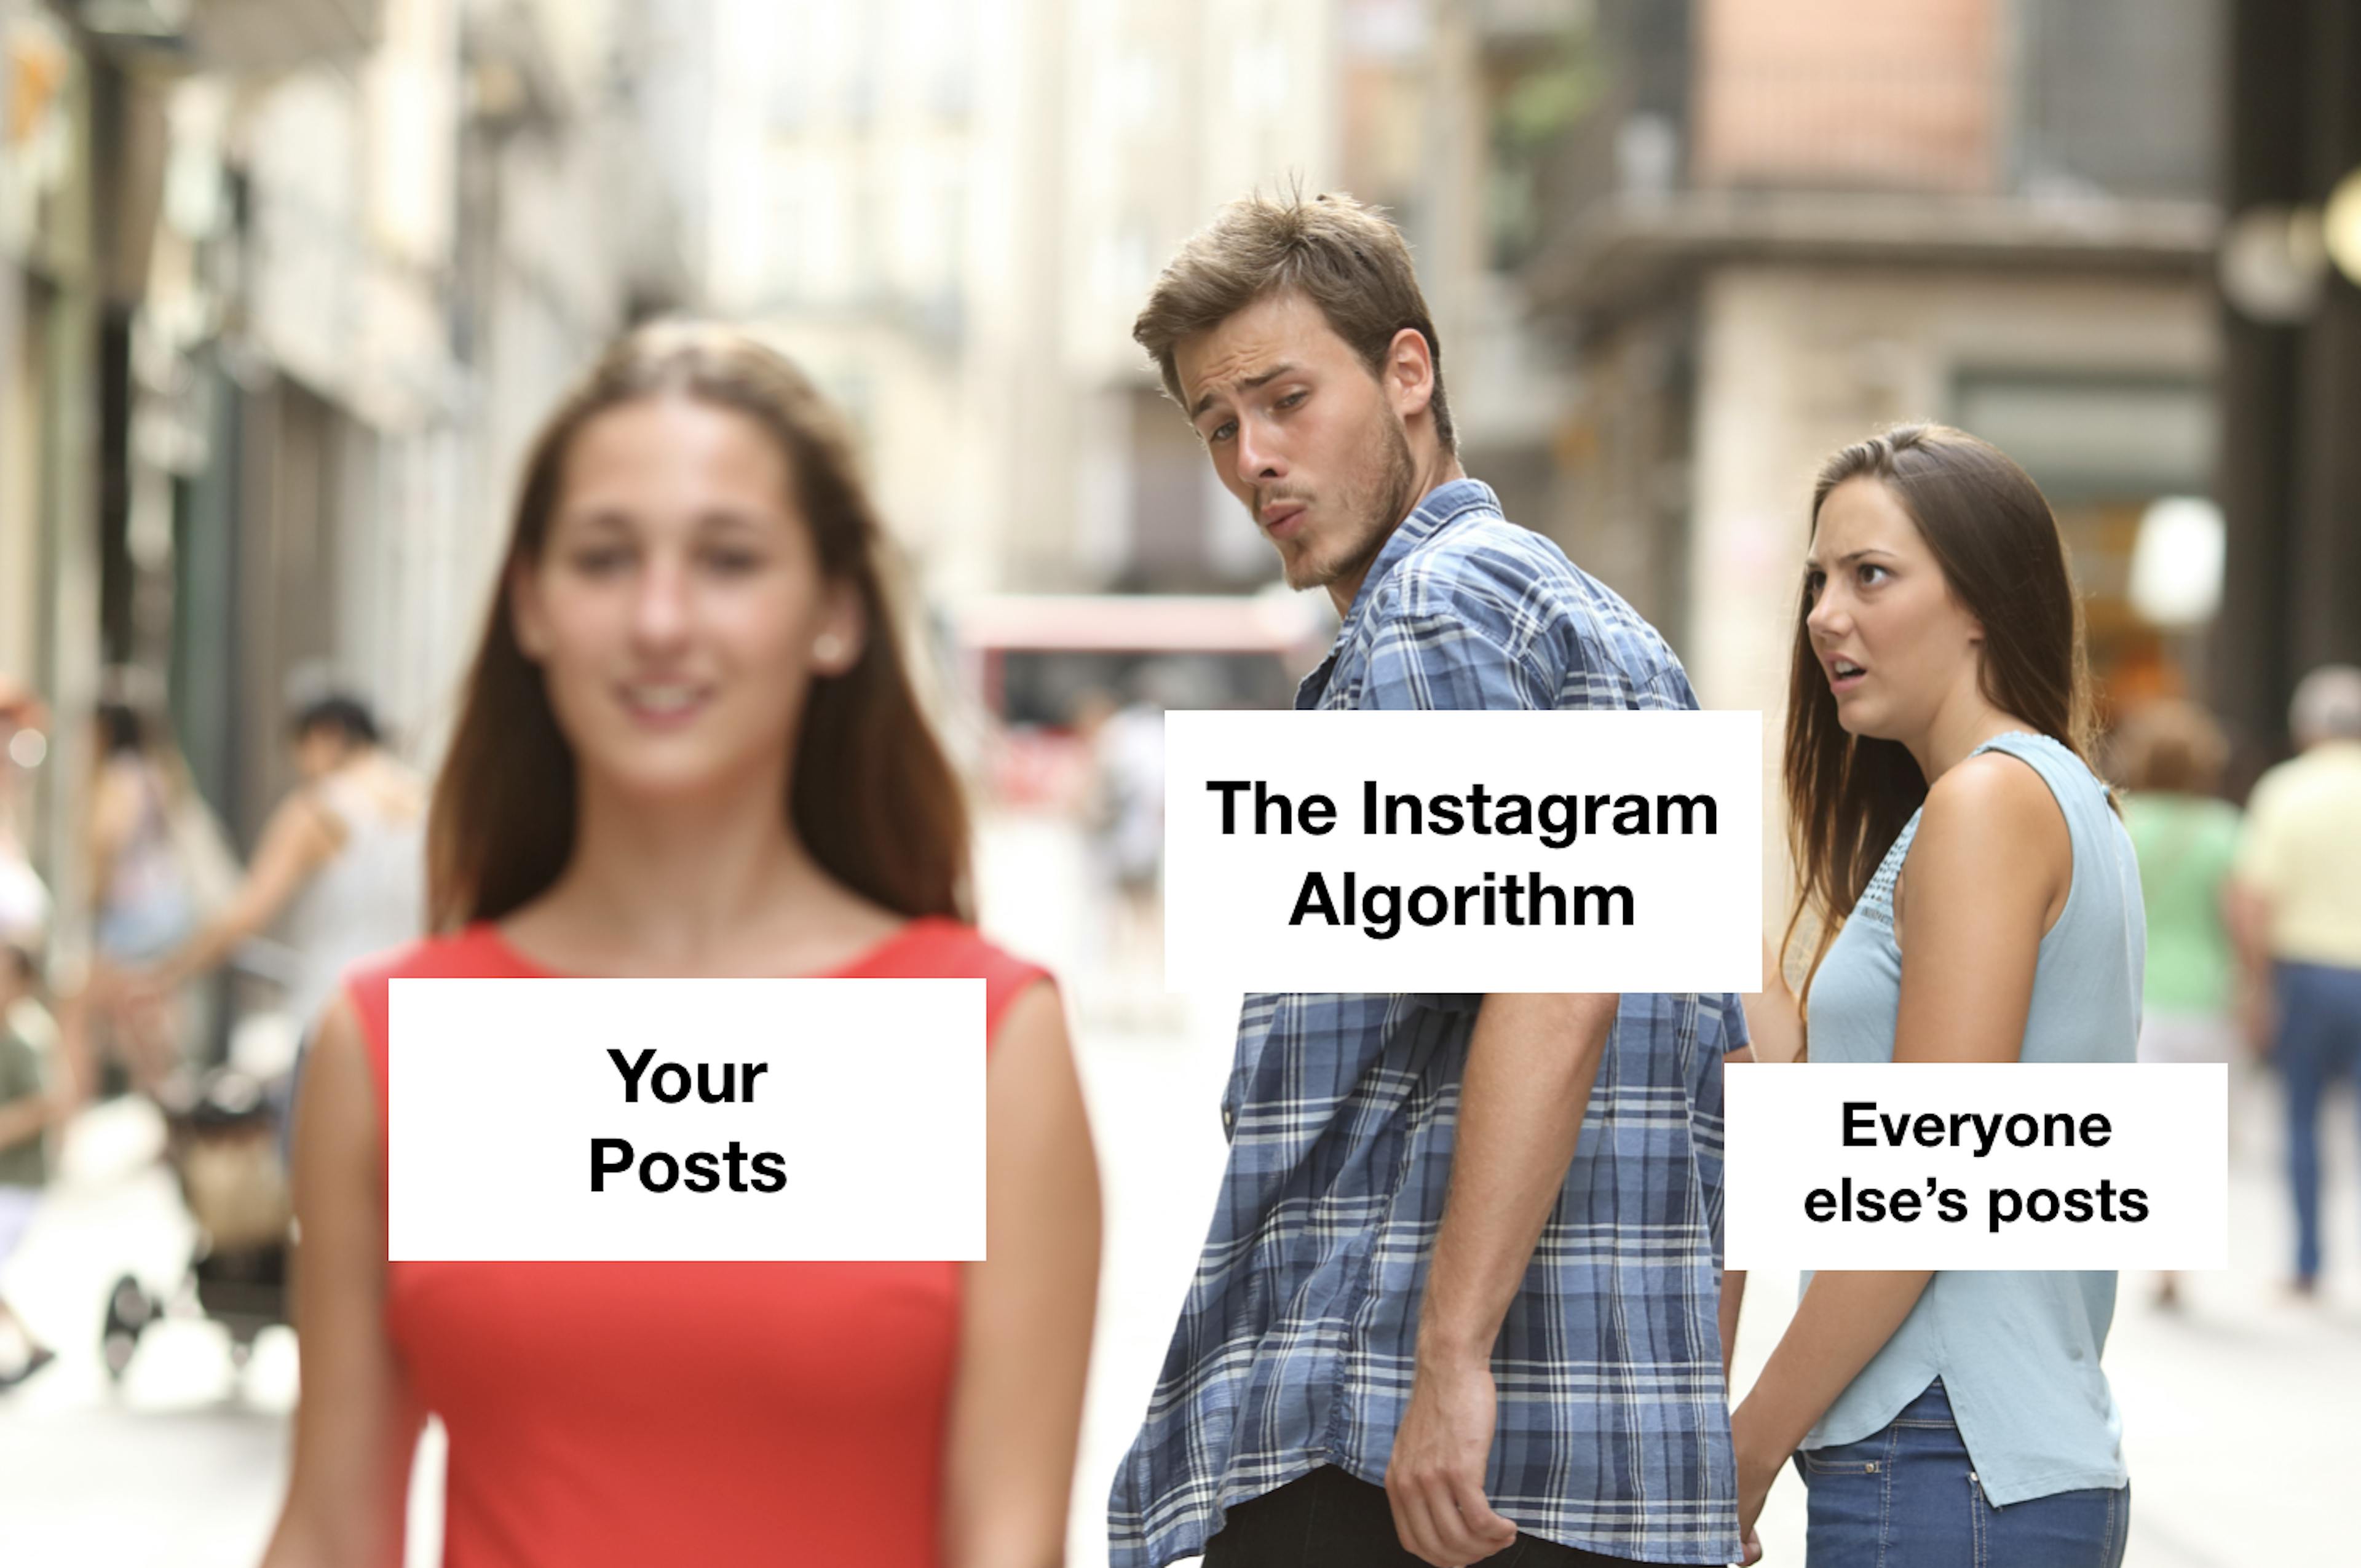 /the-principles-behind-how-the-instagram-algorithm-works-bec902eca17e feature image